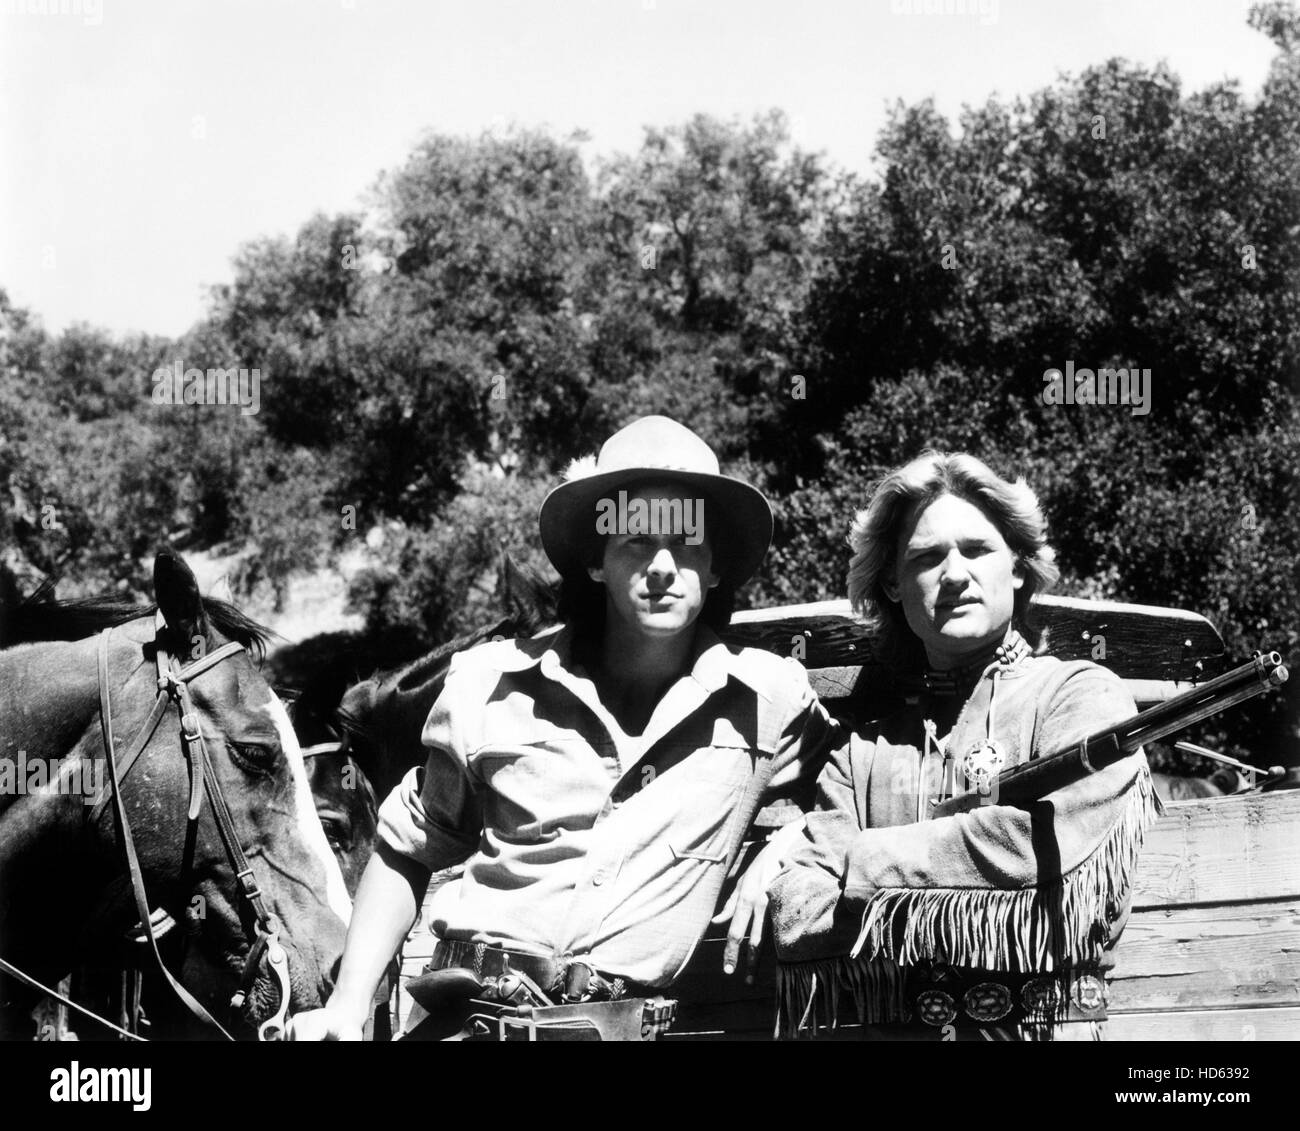 THE QUEST, (aka THE LONGEST DRIVE), from left: Kurt Russell, Tim Matheson, 1976 Stock Photo